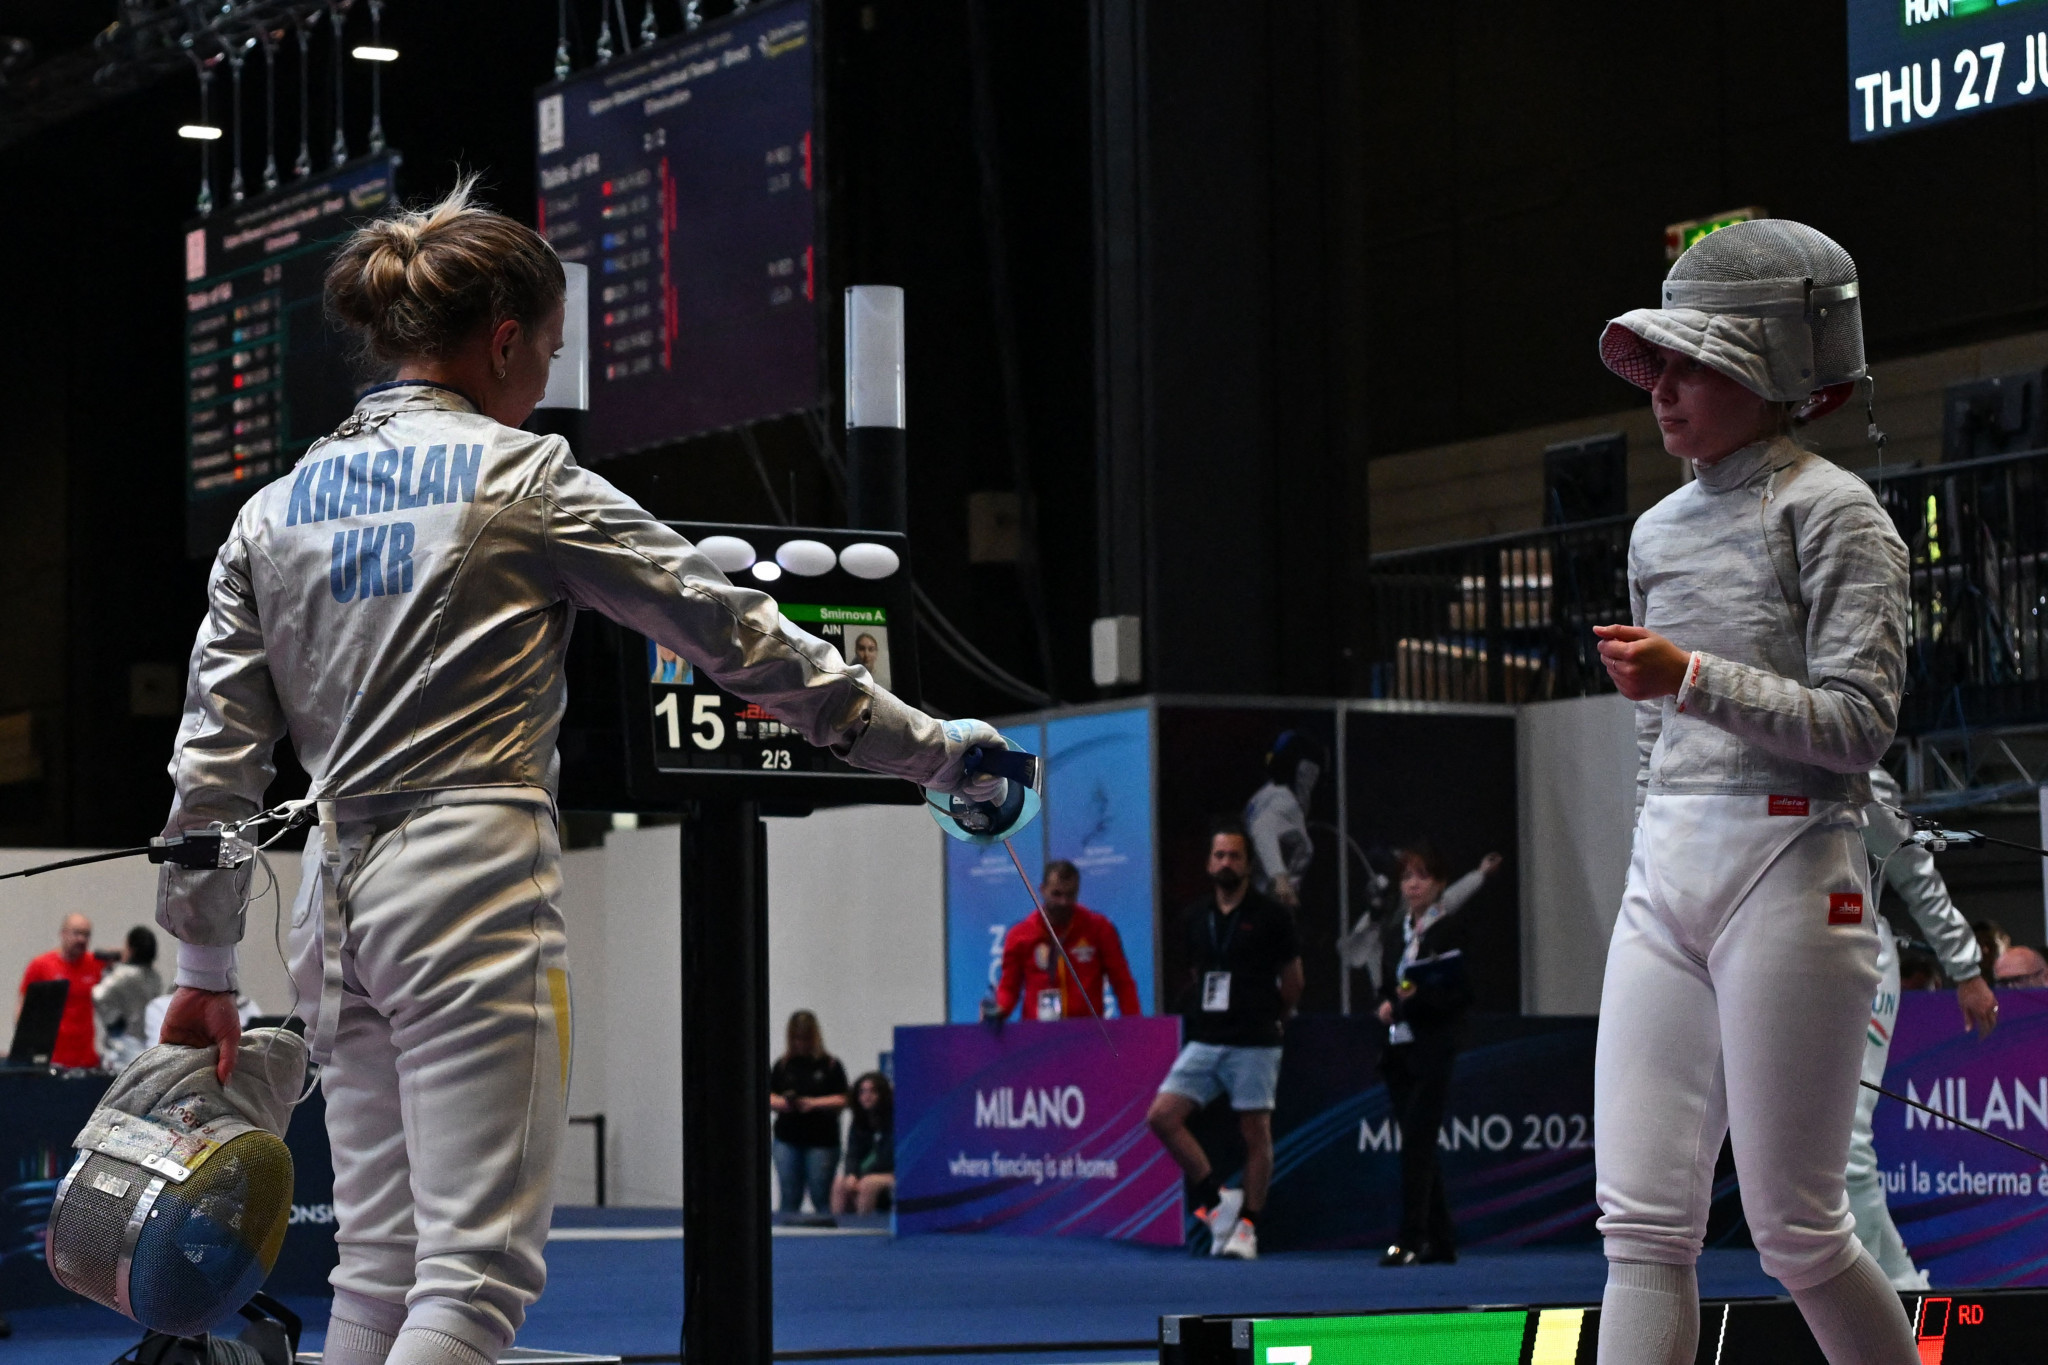 The Ukrainian Fencing Federation has called upon the IOC to address the FIE's 